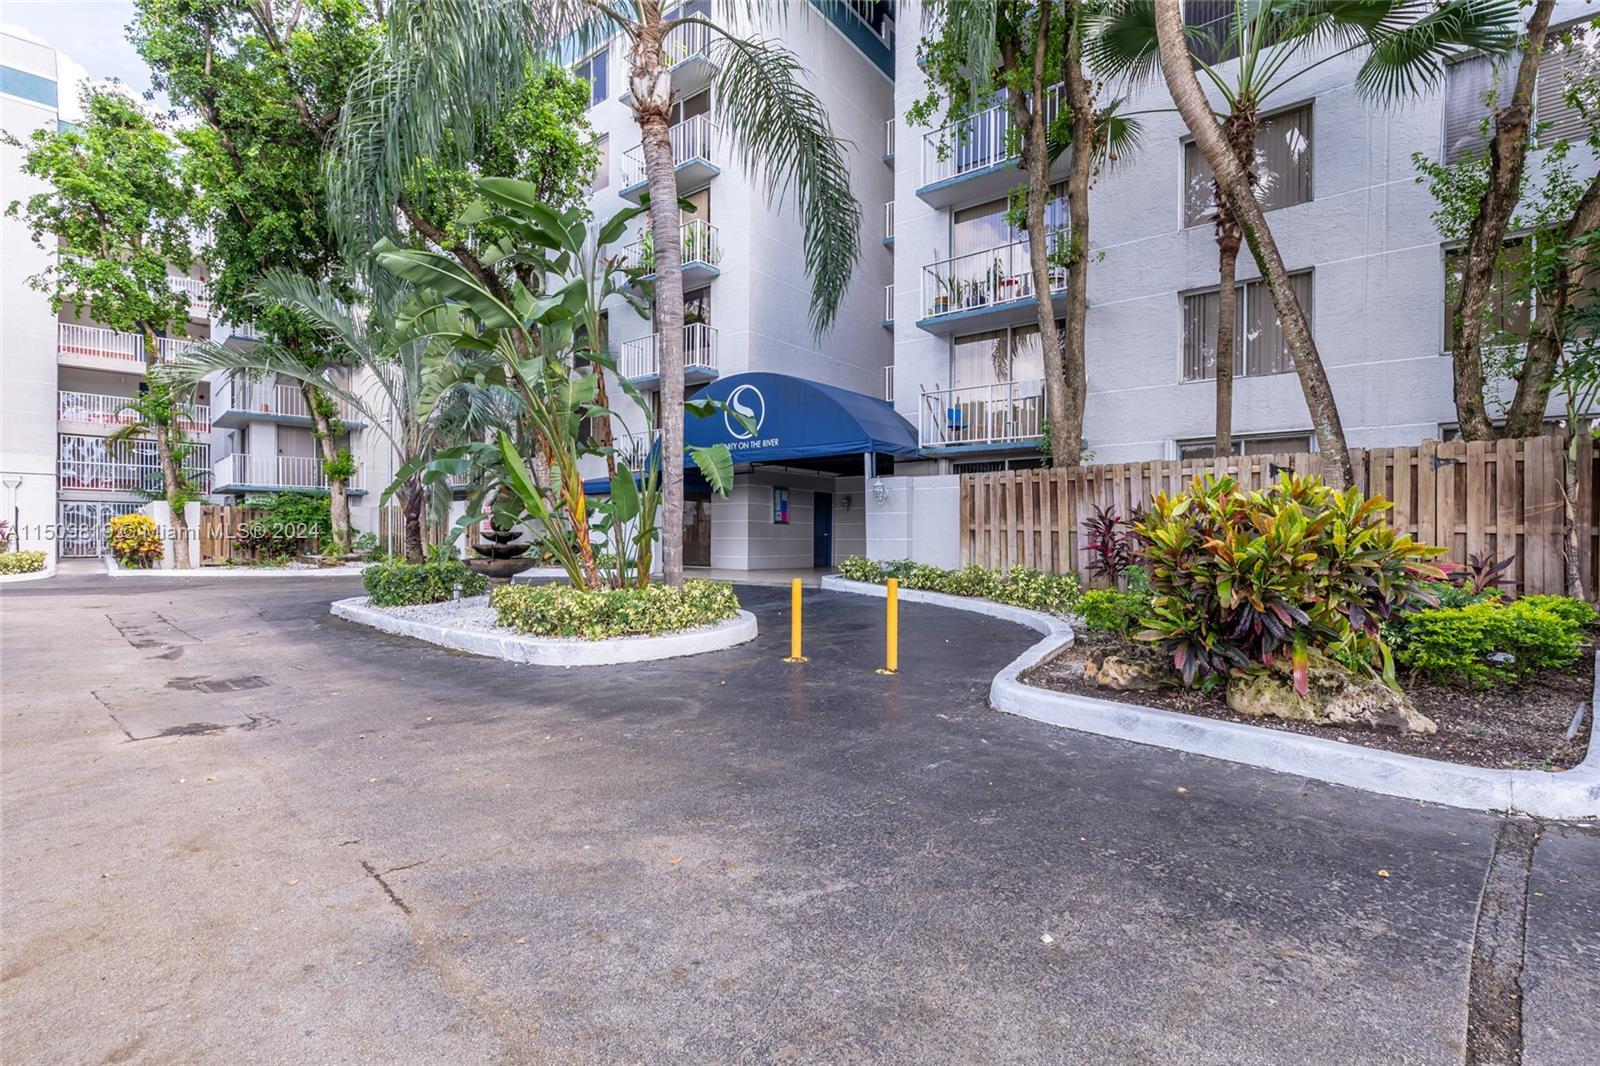 Photo of 1740 NW N River Dr #125 in Miami, FL